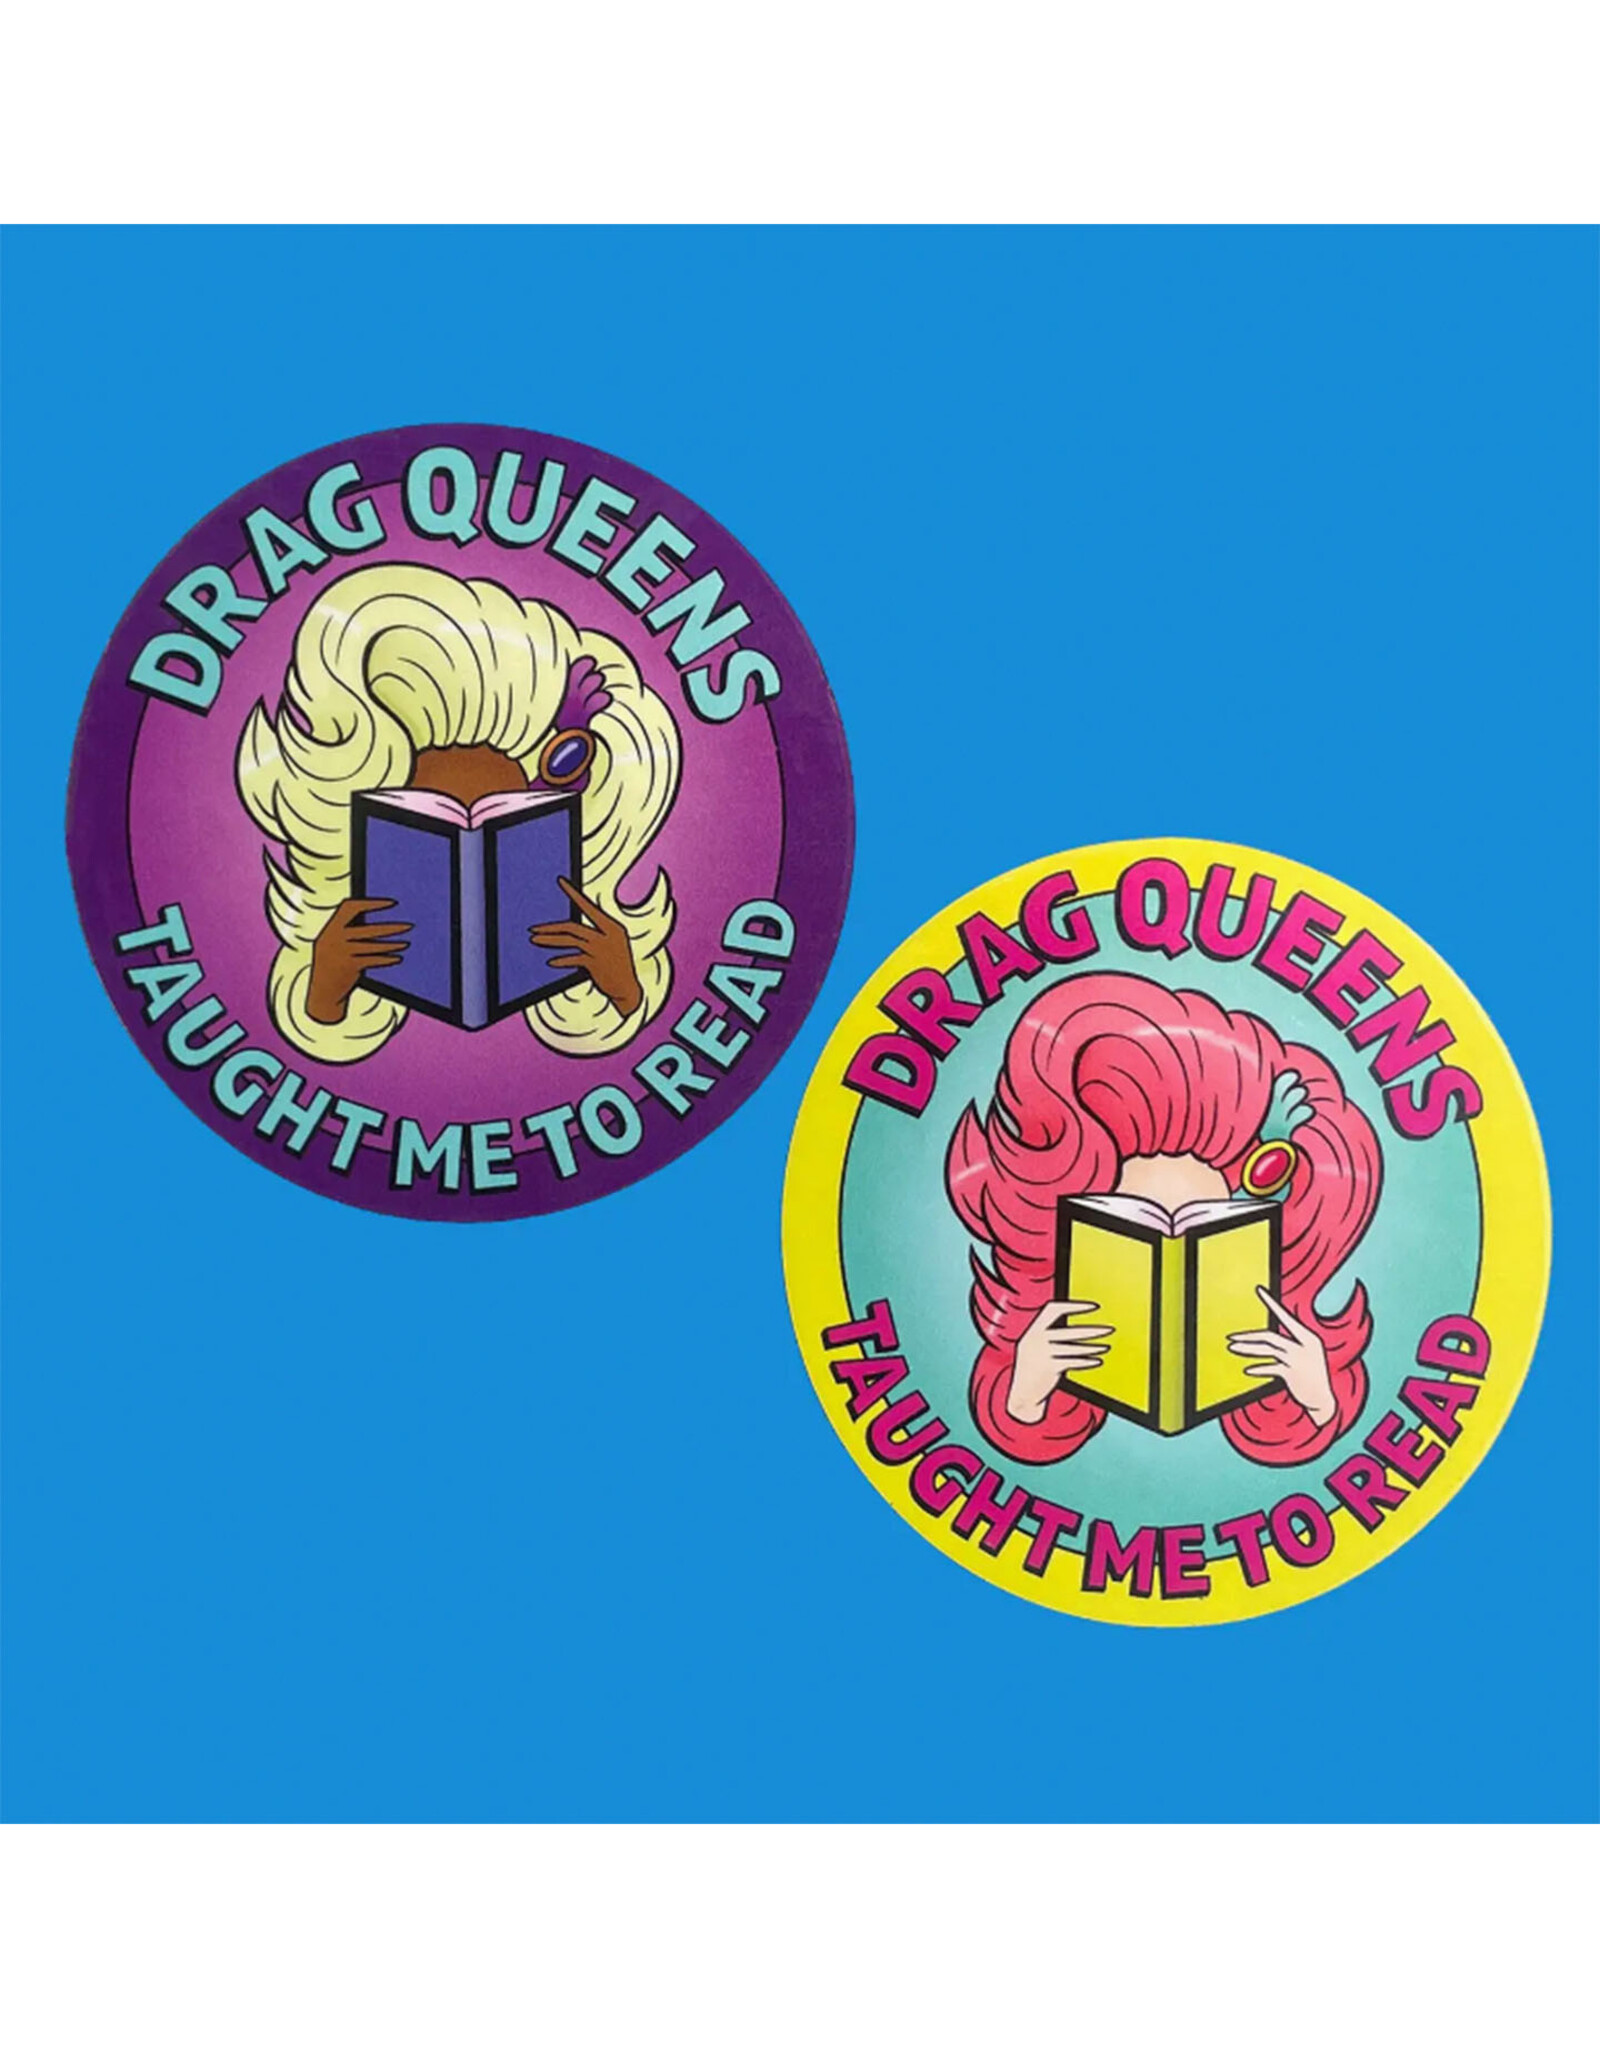 Drag Queens Taught Me To Read Stickers - Set of 2